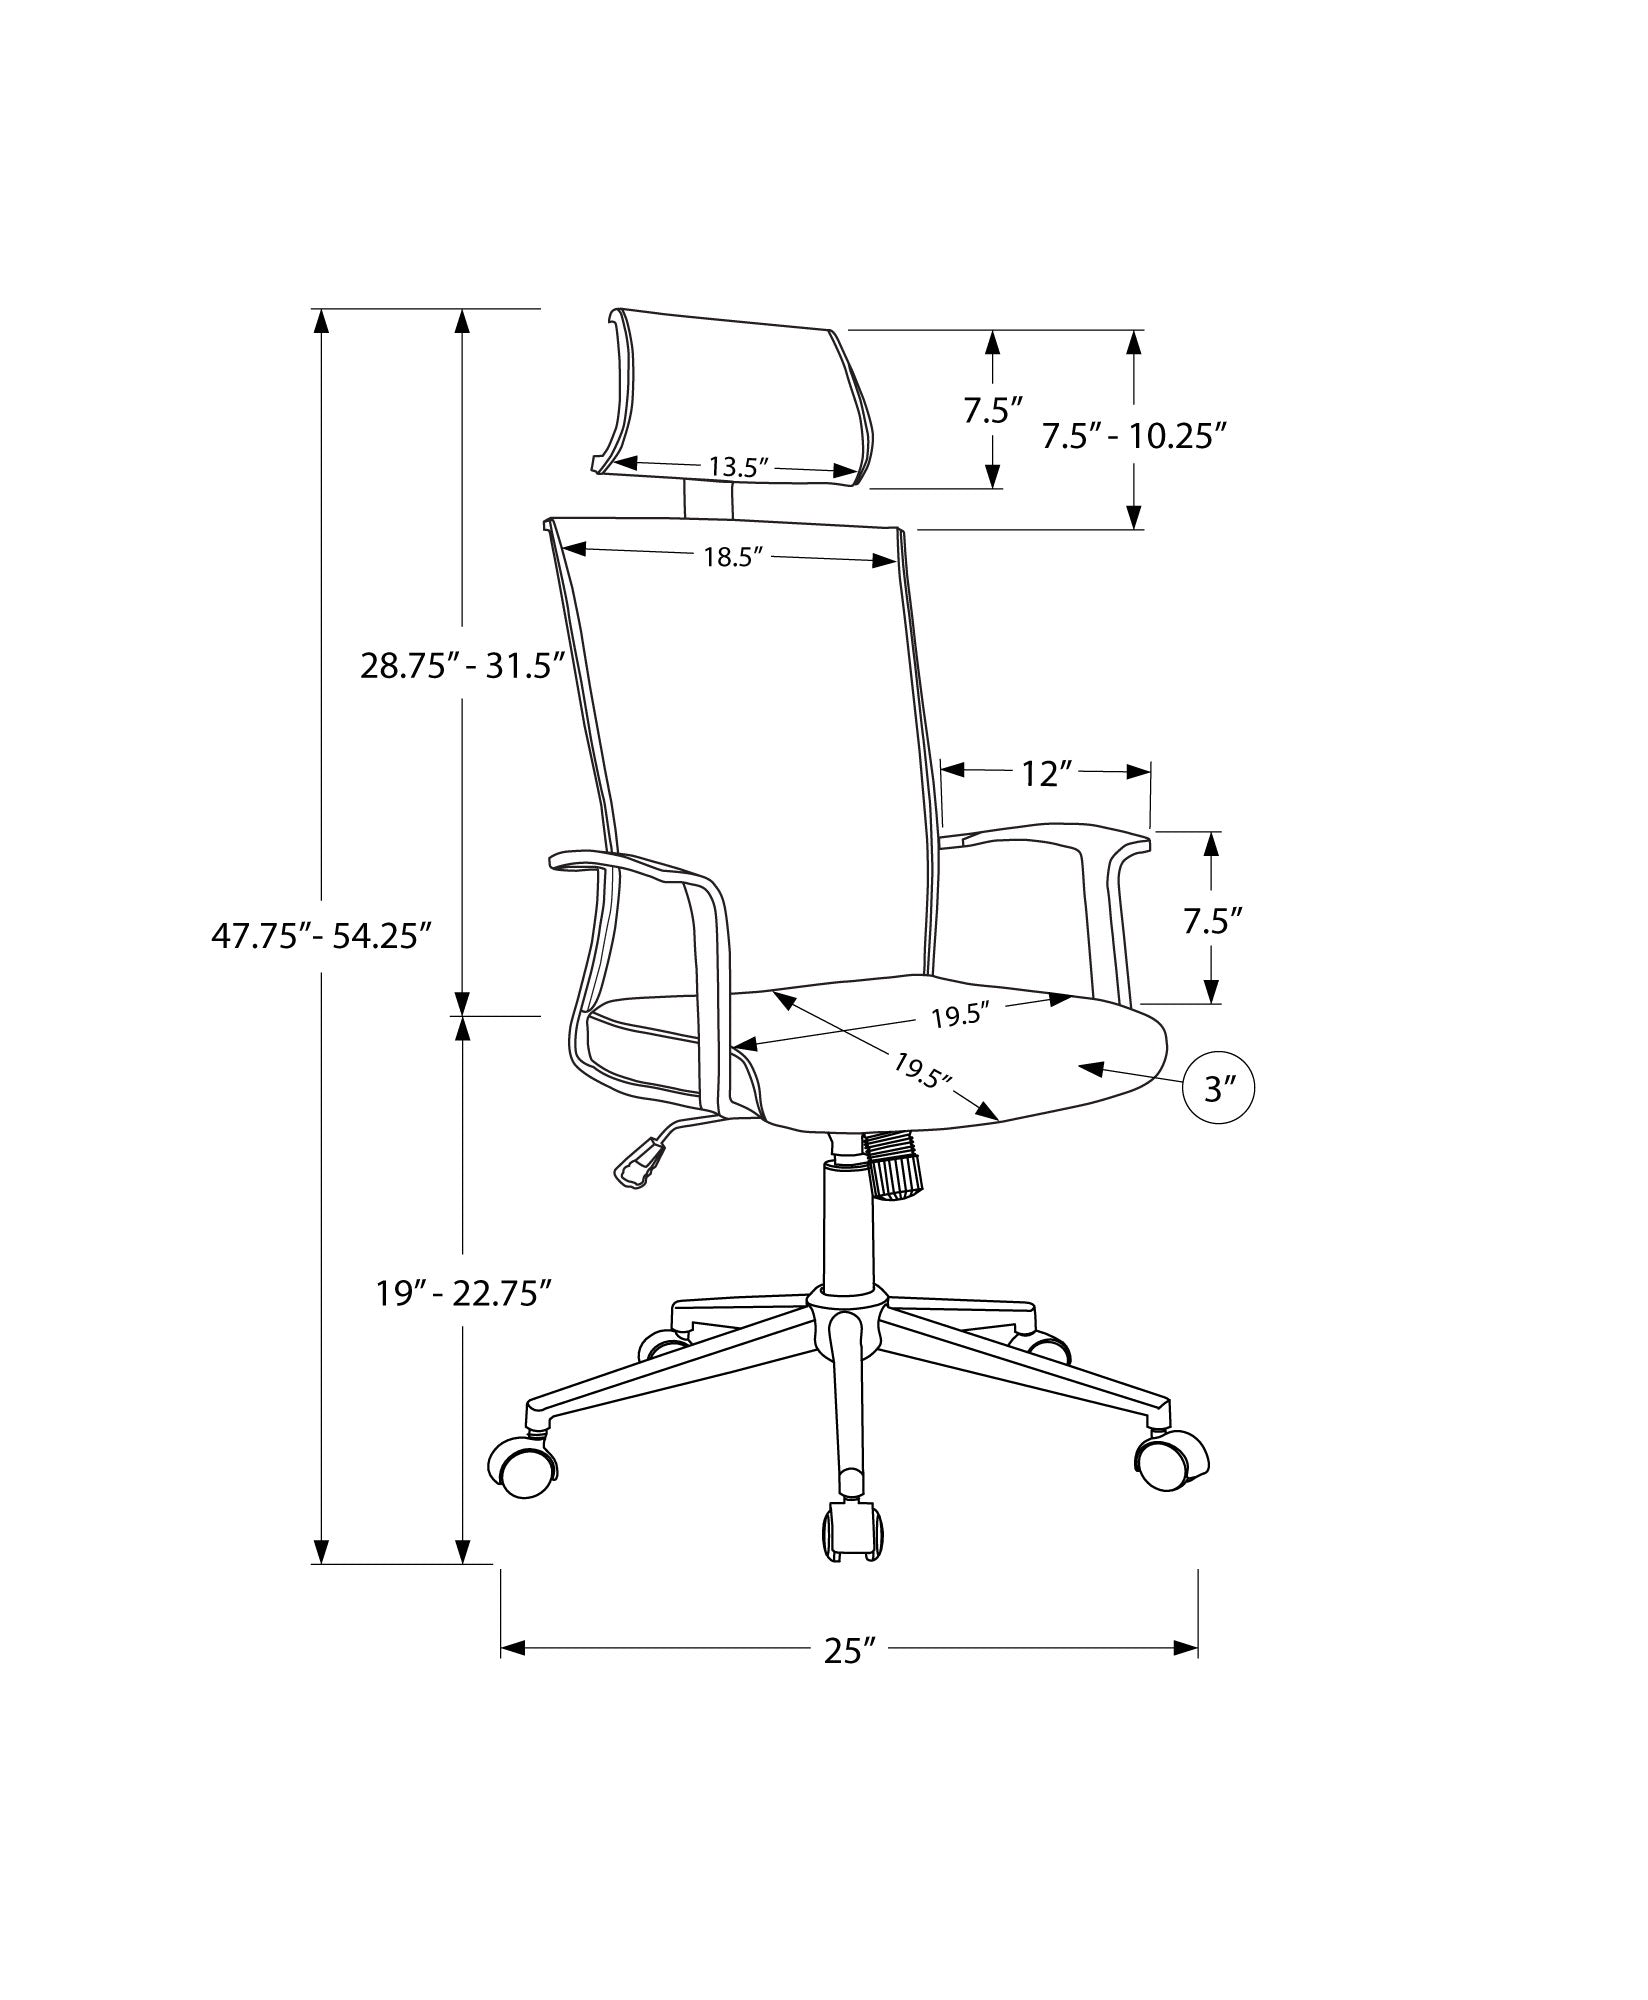 MN-967301    Office Chair, Adjustable Height, Swivel, Ergonomic, Armrests, Computer Desk, Office, Metal Base, Fabric, White, Chrome, Contemporary, Modern